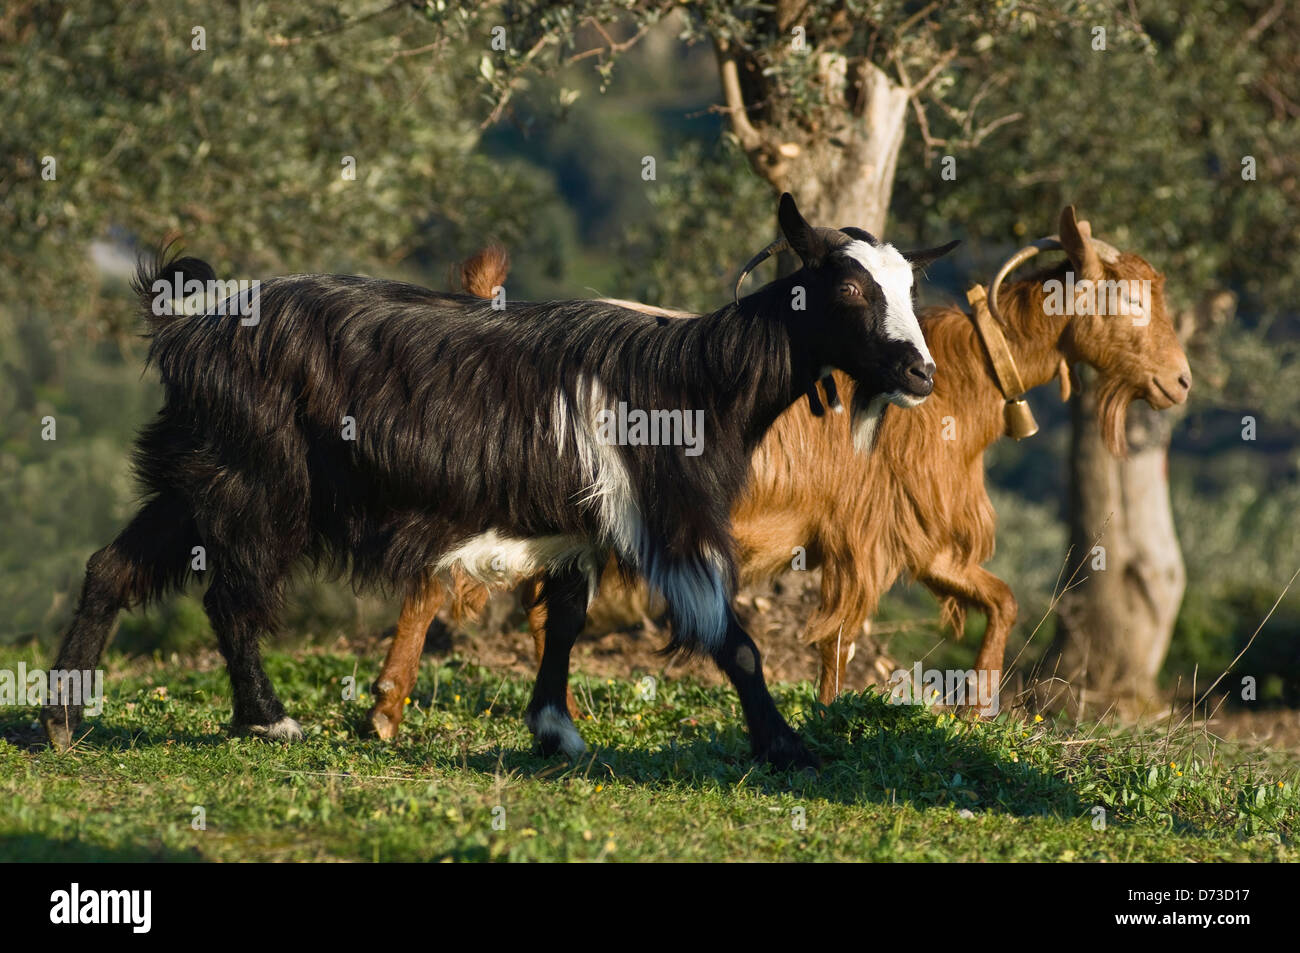 Two goats on a field (Greece) Stock Photo